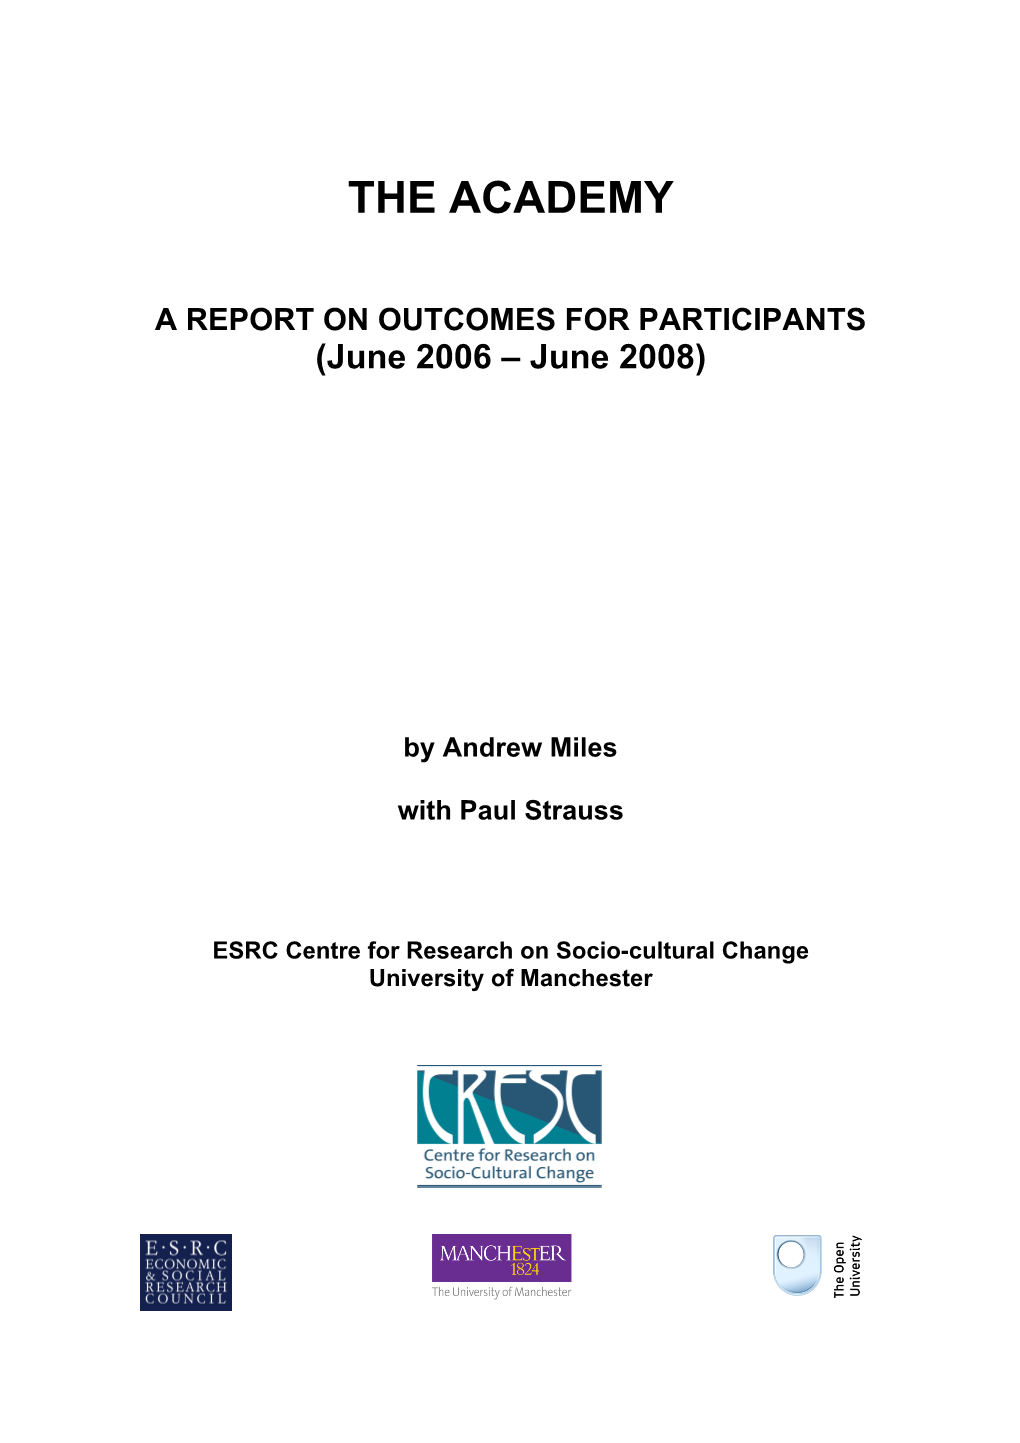 The Academy: a Report on Outcomes for Participants